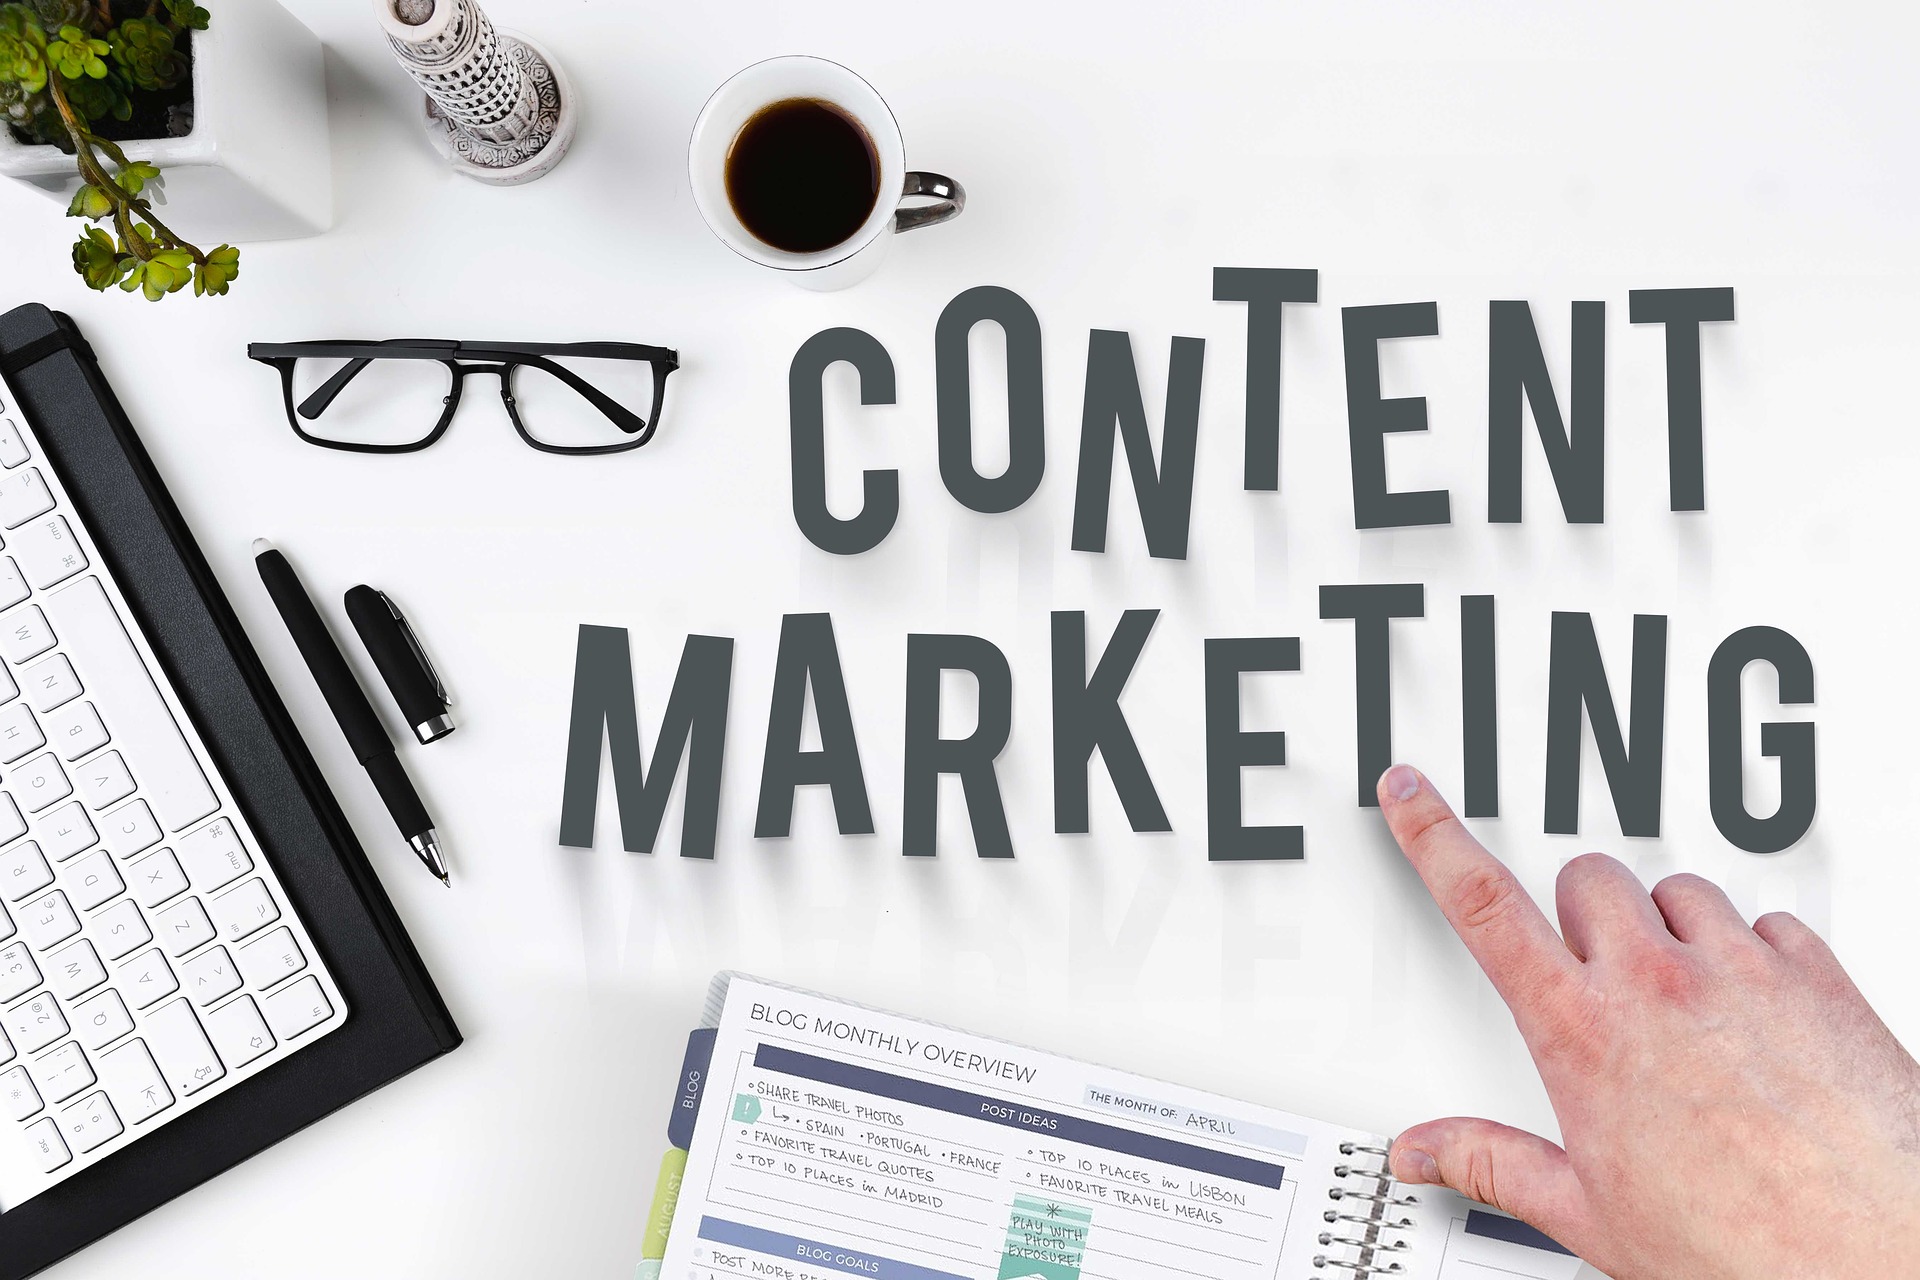 5 Effective Content Marketing Strategies To Increase Traffic and Leads